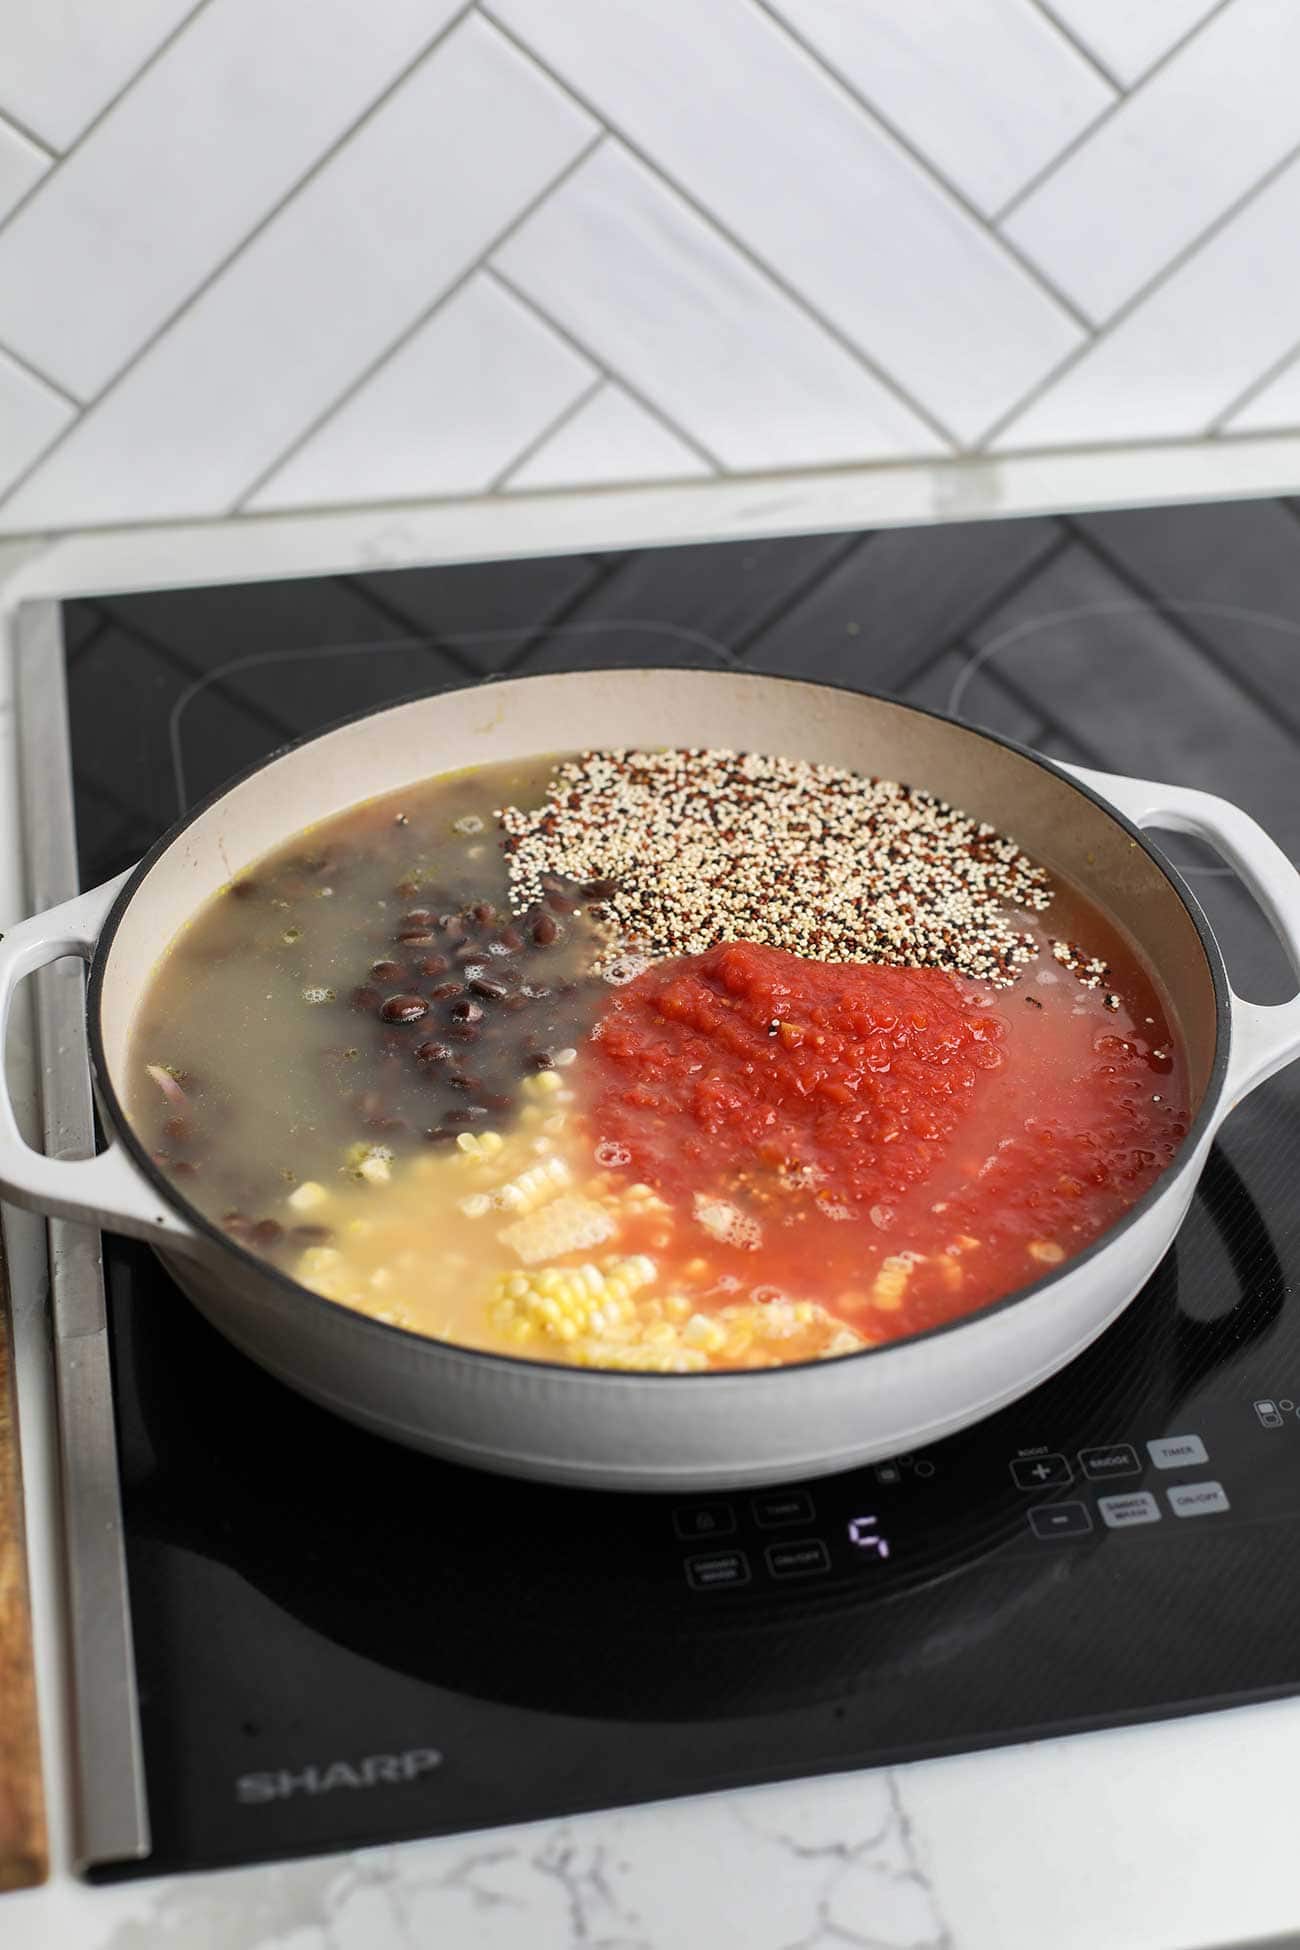 Step 2 shows adding all the mexican quinoa ingredients to a dutch oven and heating to a boil.